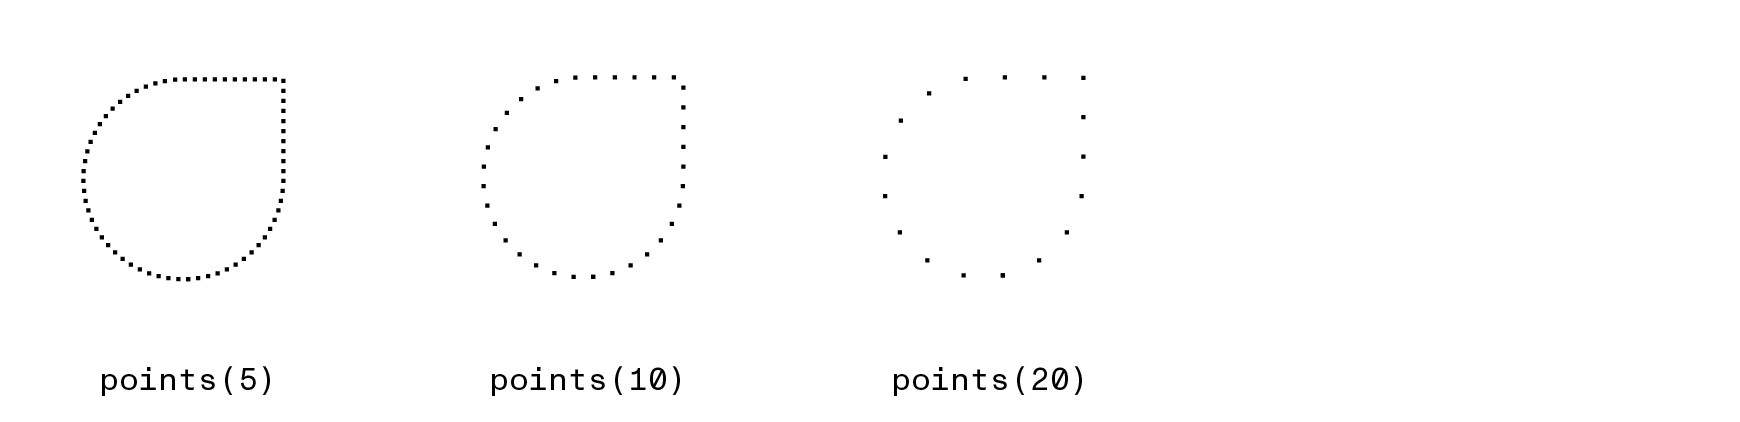 sampling points from a path